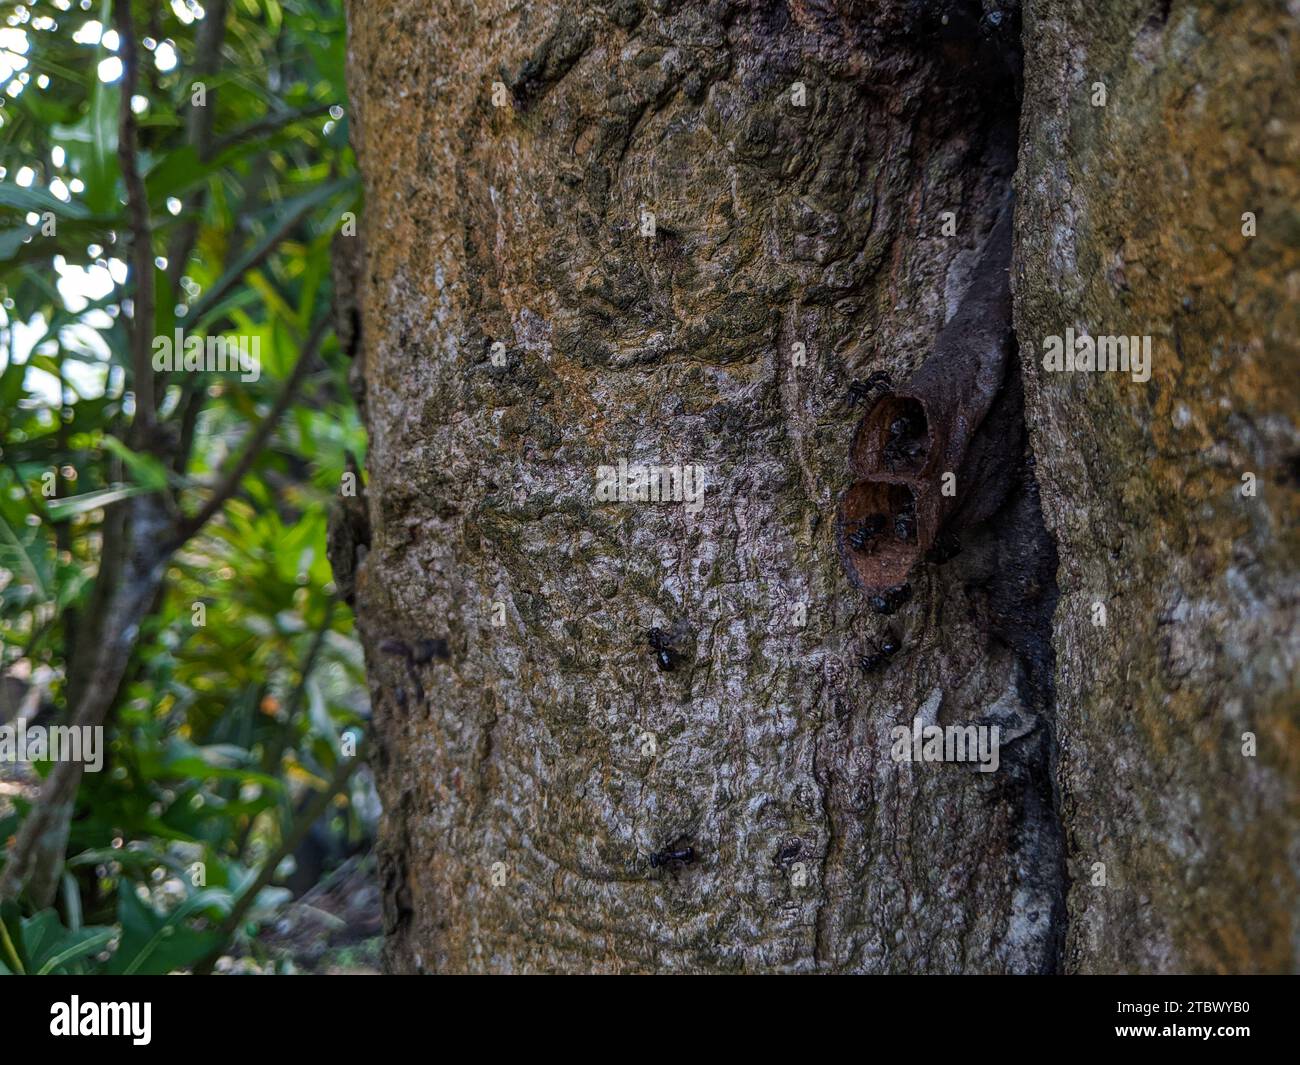 Closeup of a stingless bees native to Malaysia forests. Nest in the tree trunk Stock Photo